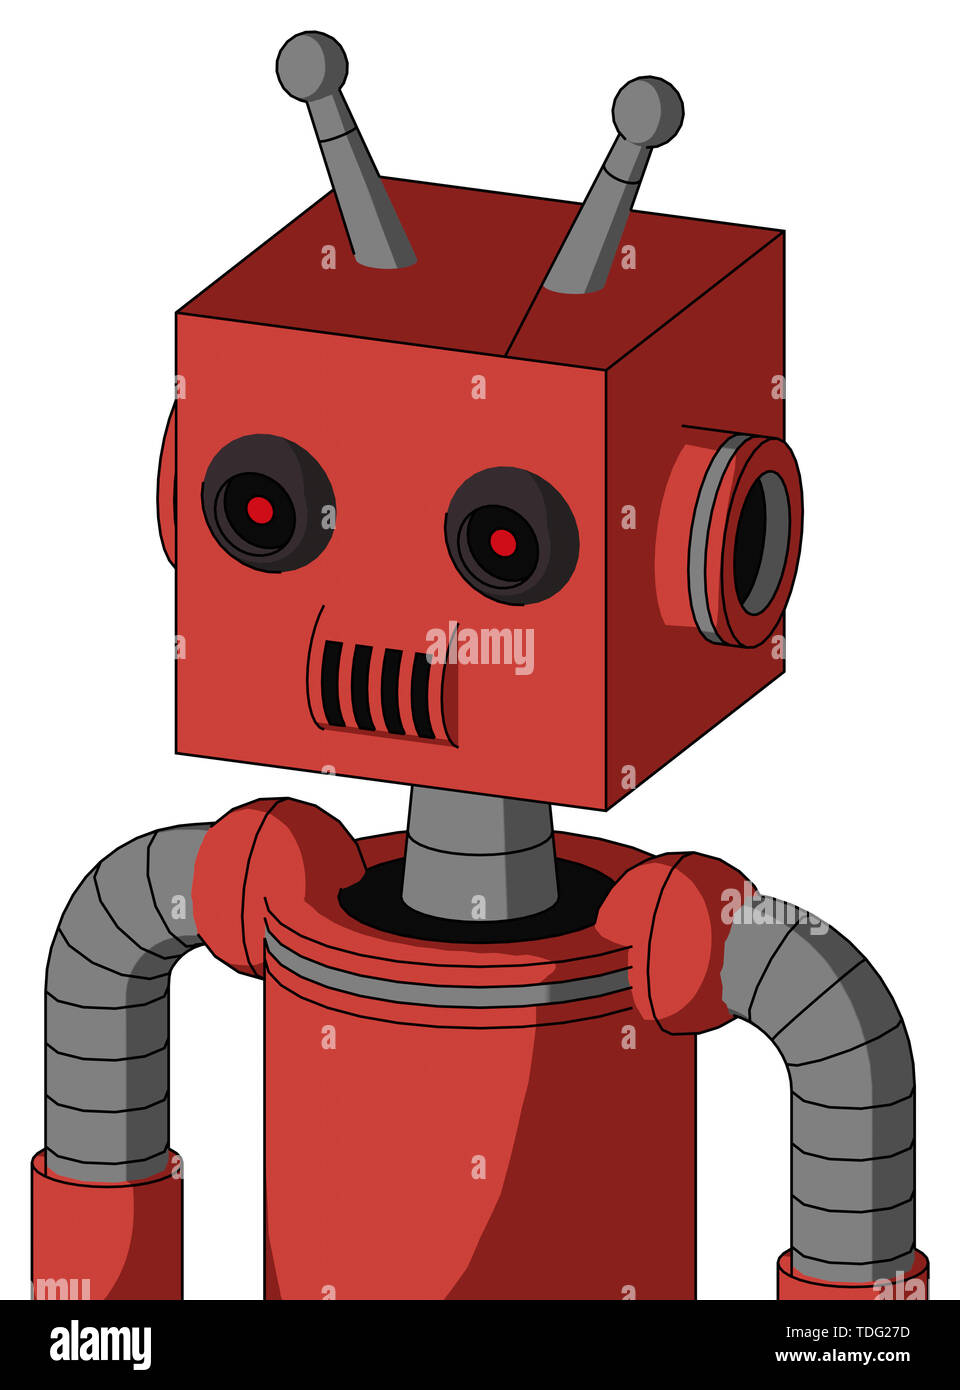 portrait-style-tomato-red-droid-with-box-head-and-speakers-mouth-and-black-glowing-red-eyes-and-double-antenna-TDG27D.jpg